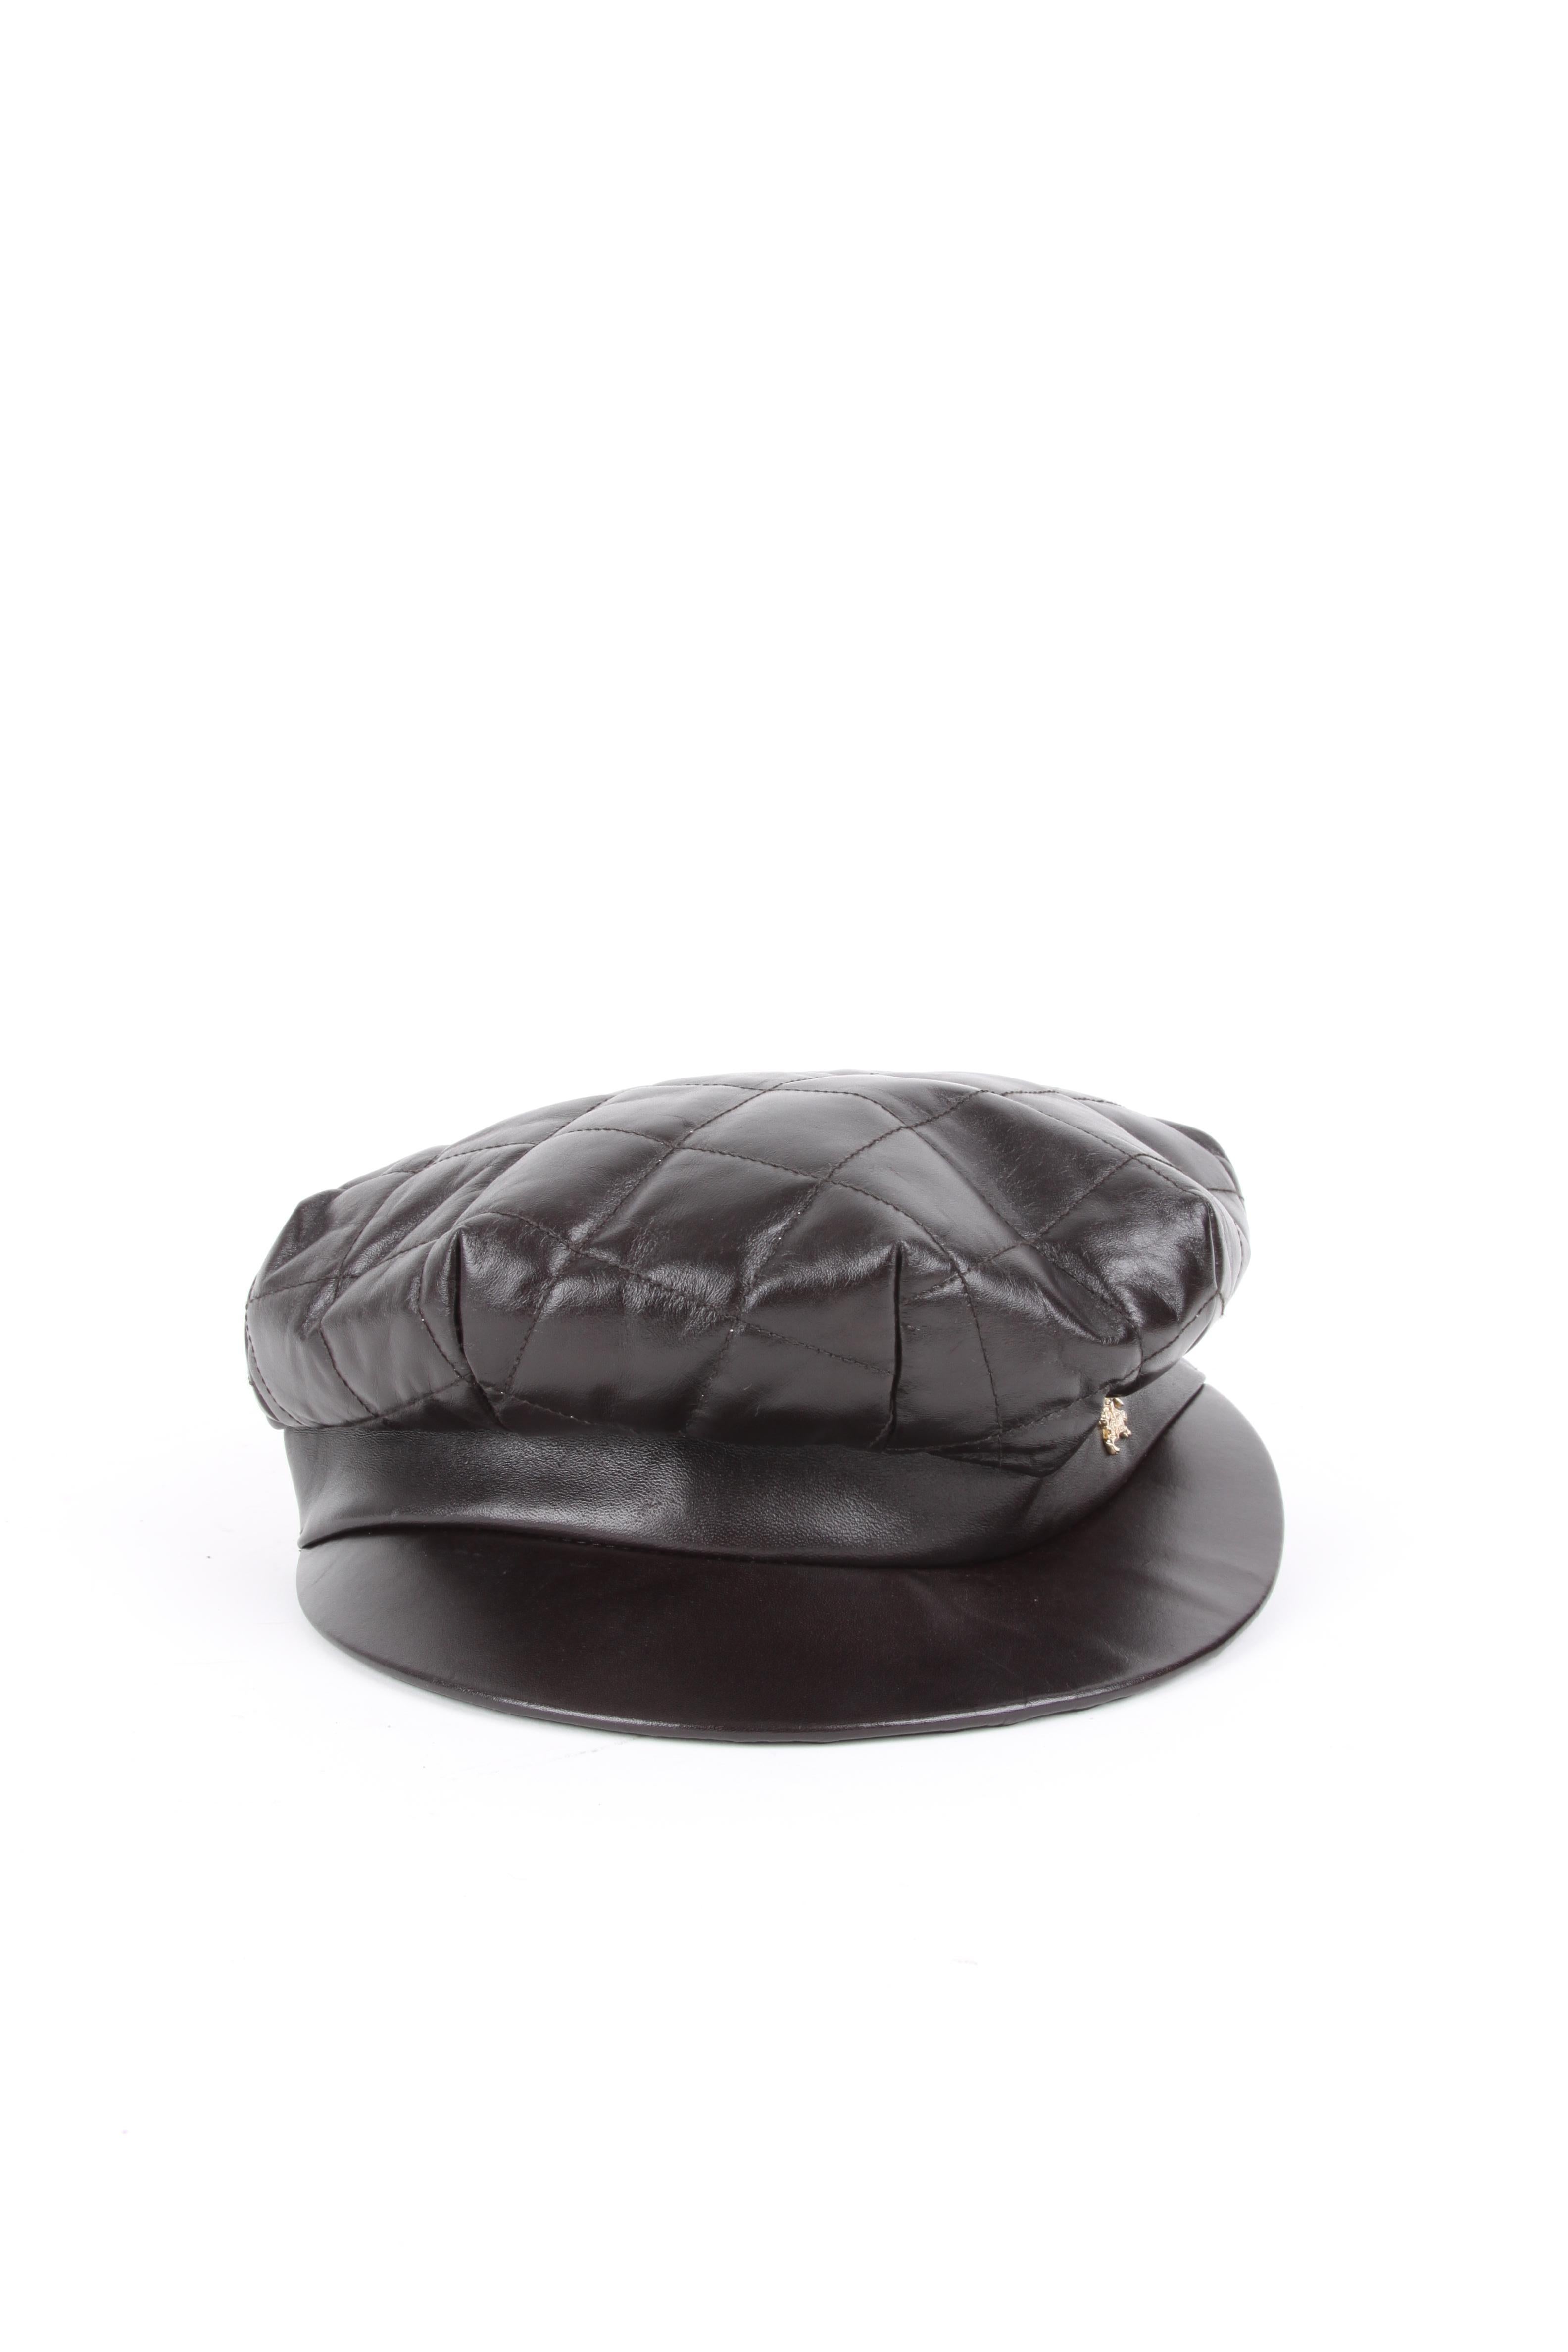 Lovely hat by Burberry crafted from supple brown leather.

COLOR: Brown

MATERIAL: Leather

CONDITION: 8/10

MEASURES: Size inside S,  54CM 

ORGIN: Italy

AVAILABILITY: ready to ship